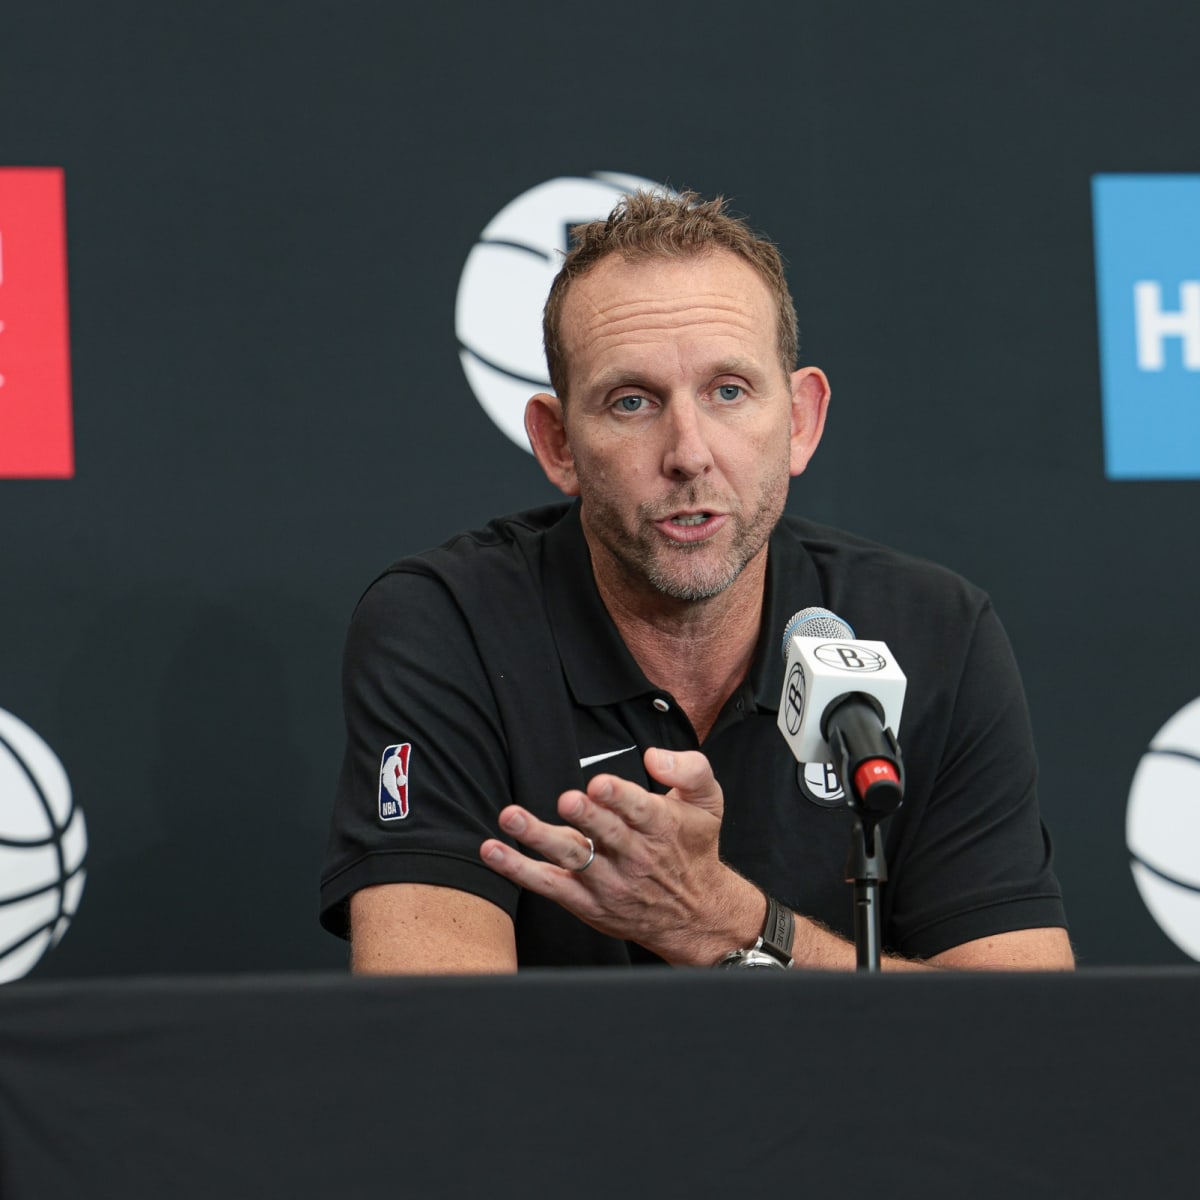 Lewis: Sean Marks expected back as Nets GM - NetsDaily